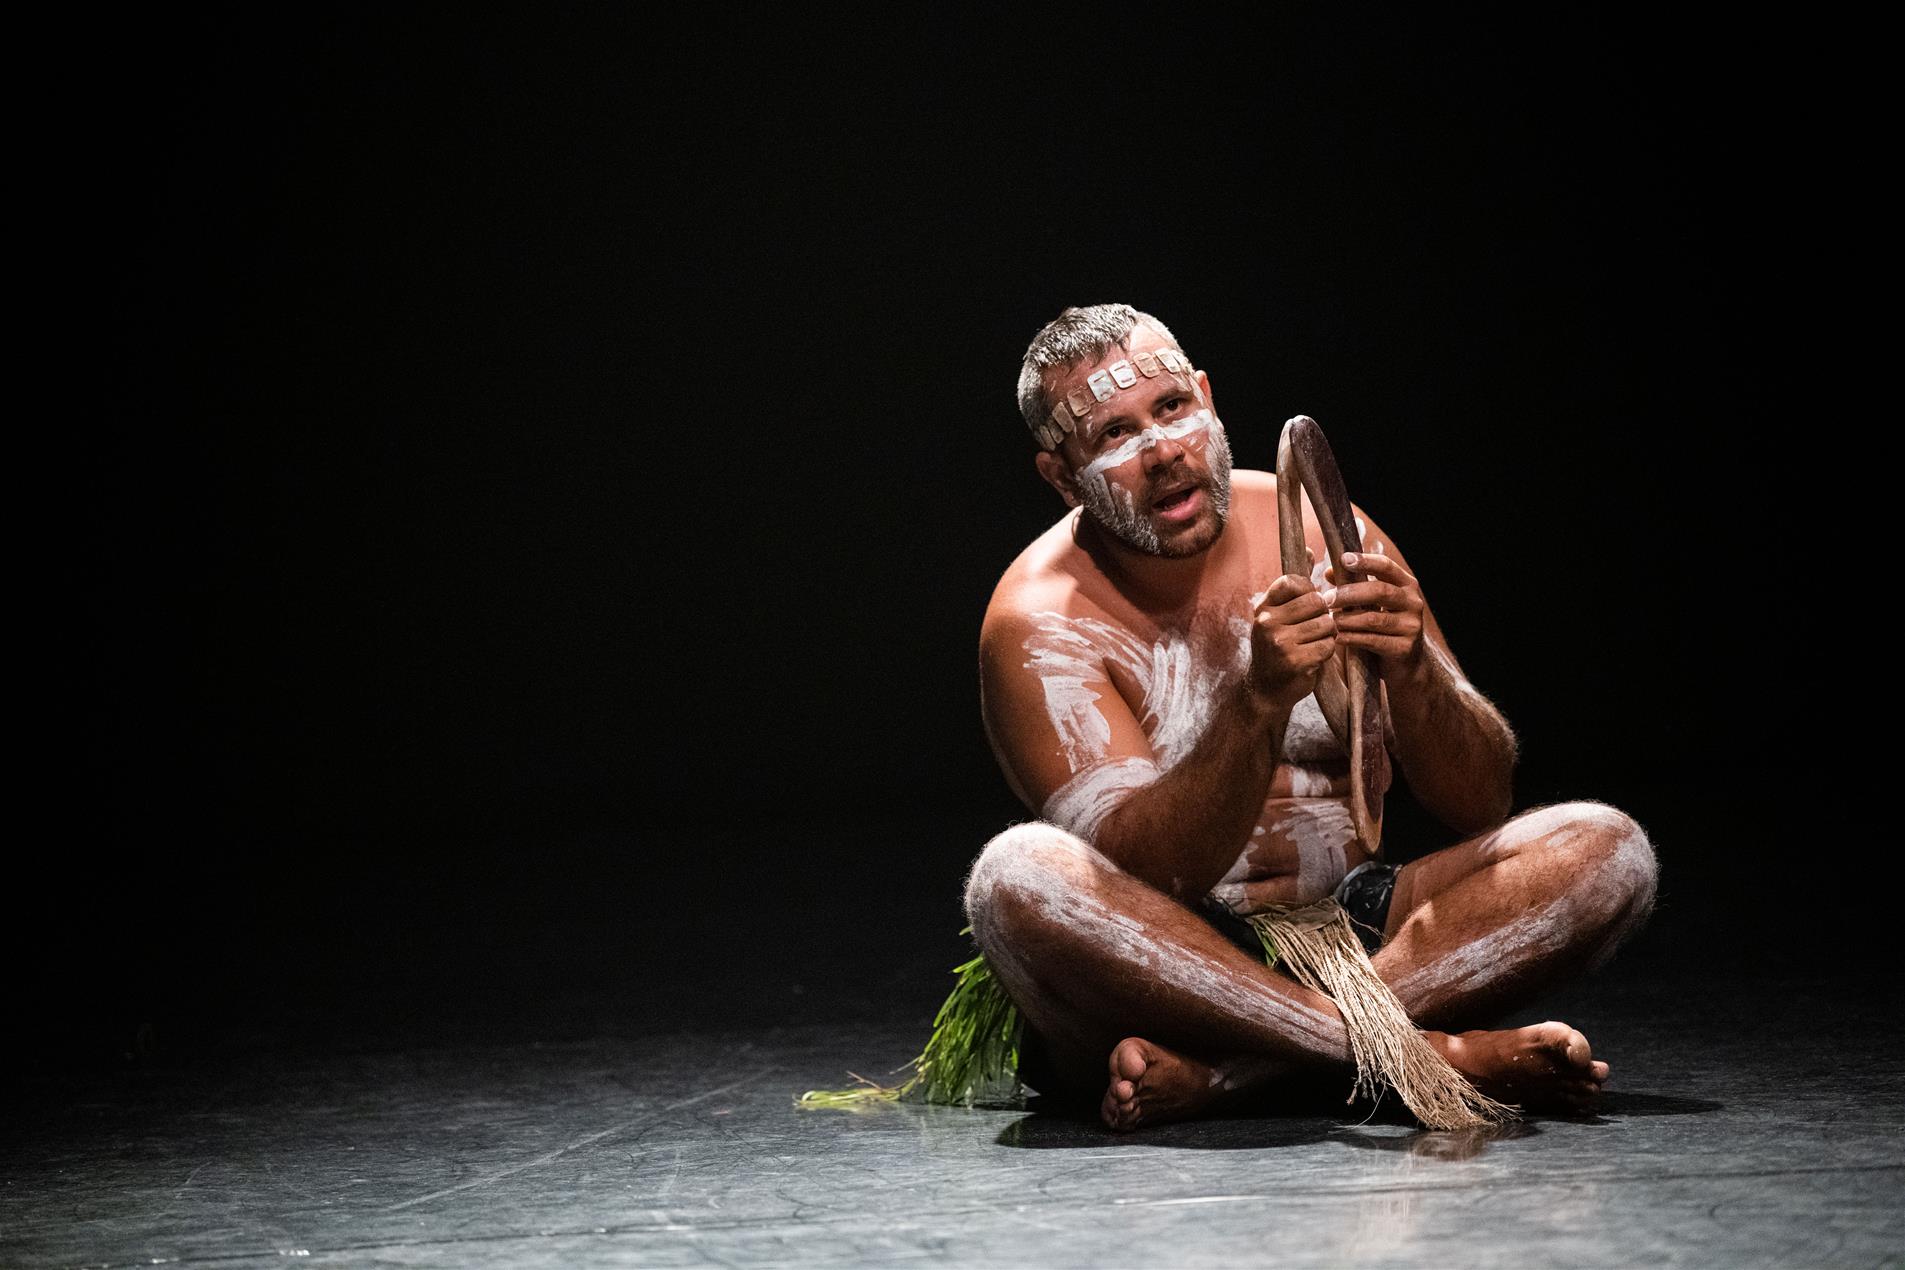 A man covered in white paint sitting on a stage performing with wooden sticks.